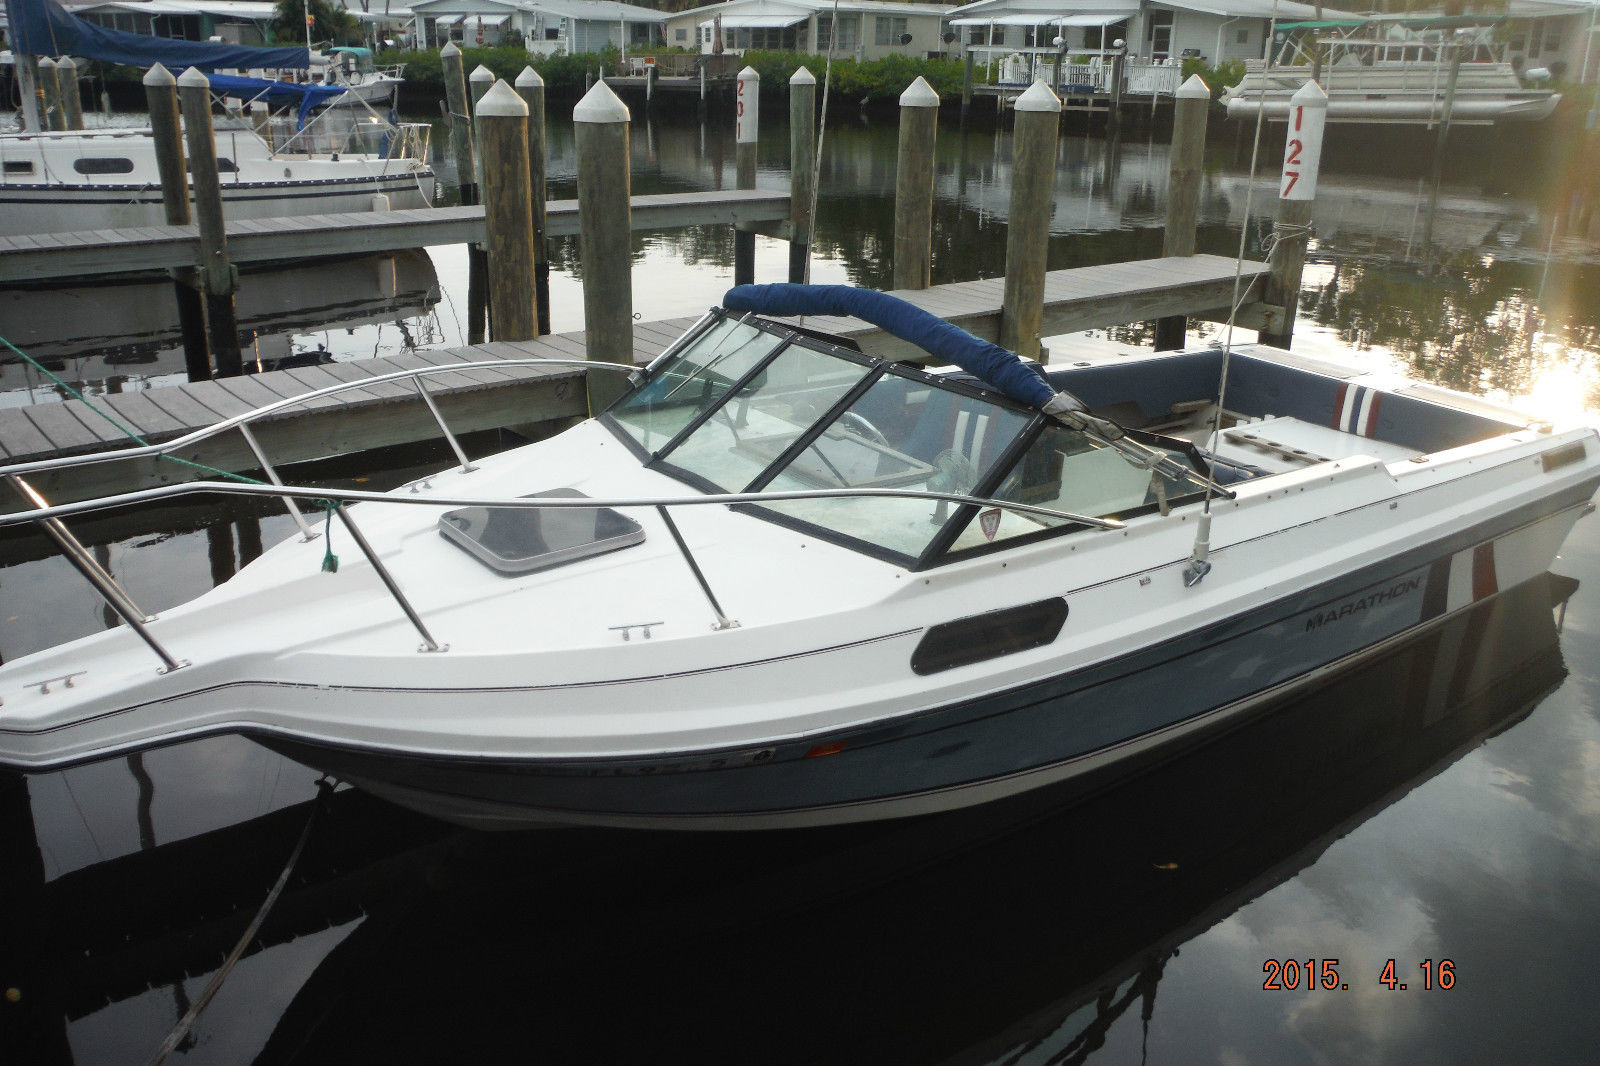 Marathon 22 Cuddy 1987 for sale for $2,250 - Boats-from ...